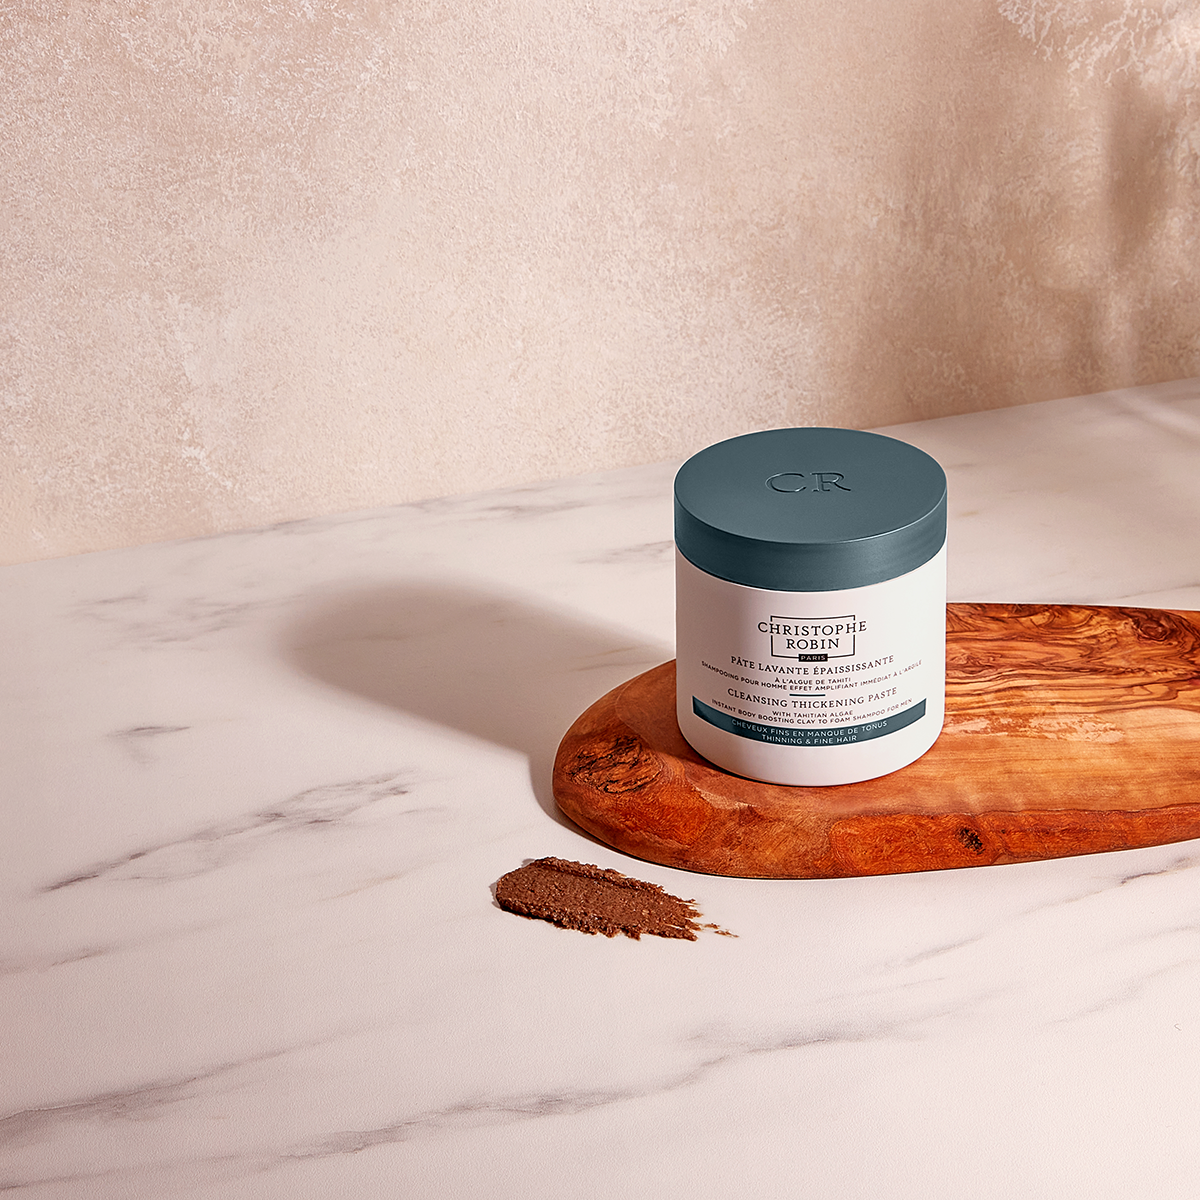 Christophe Robin - Cleansing Thickening Paste